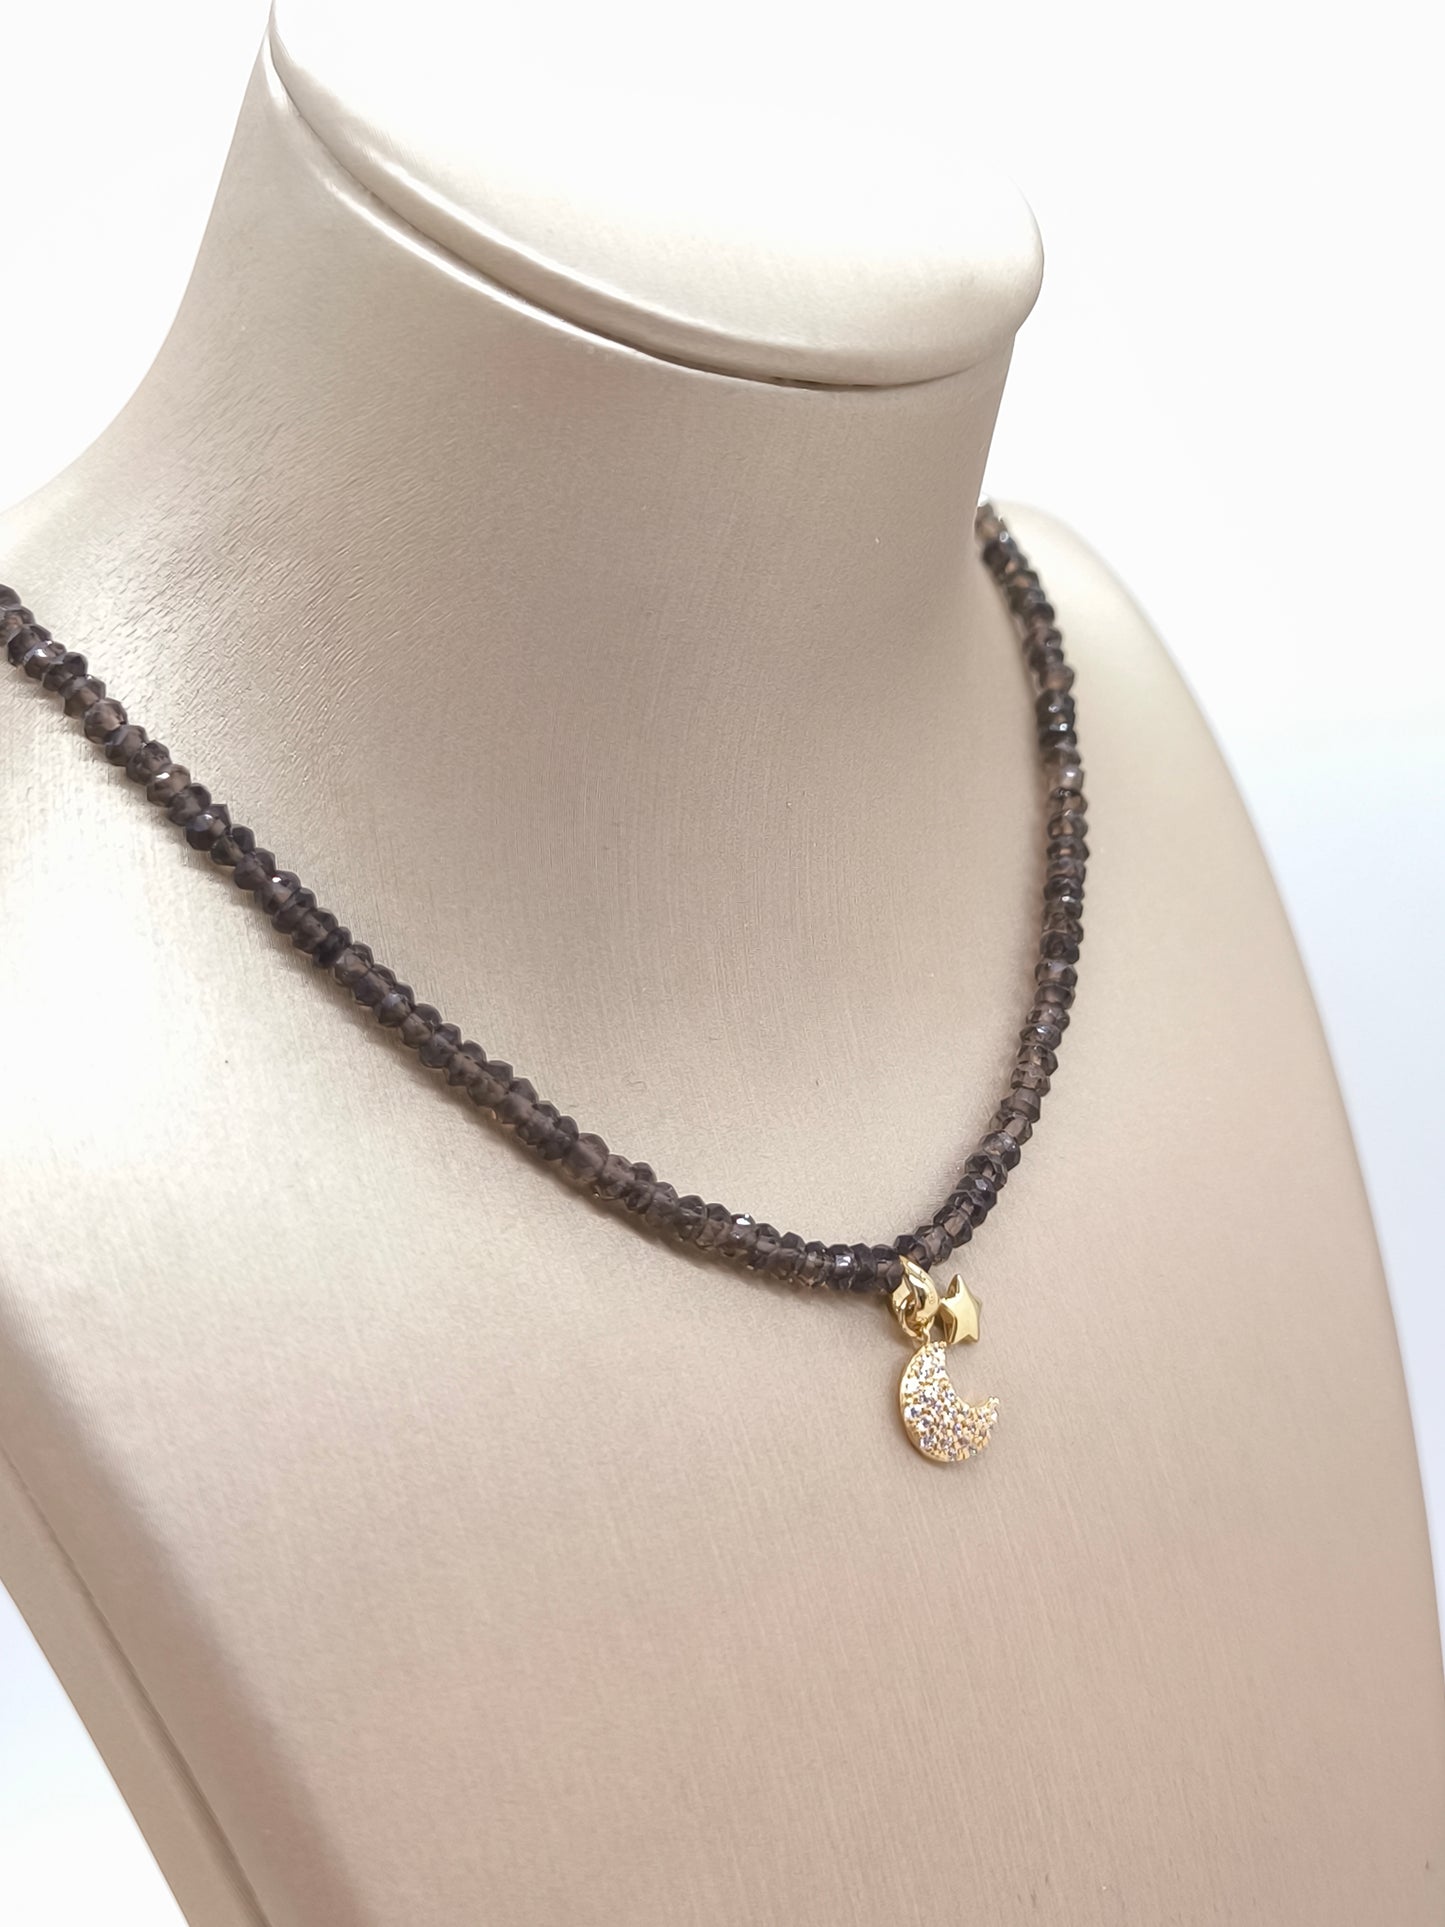 Star and moon necklace in gold and semi-precious stones